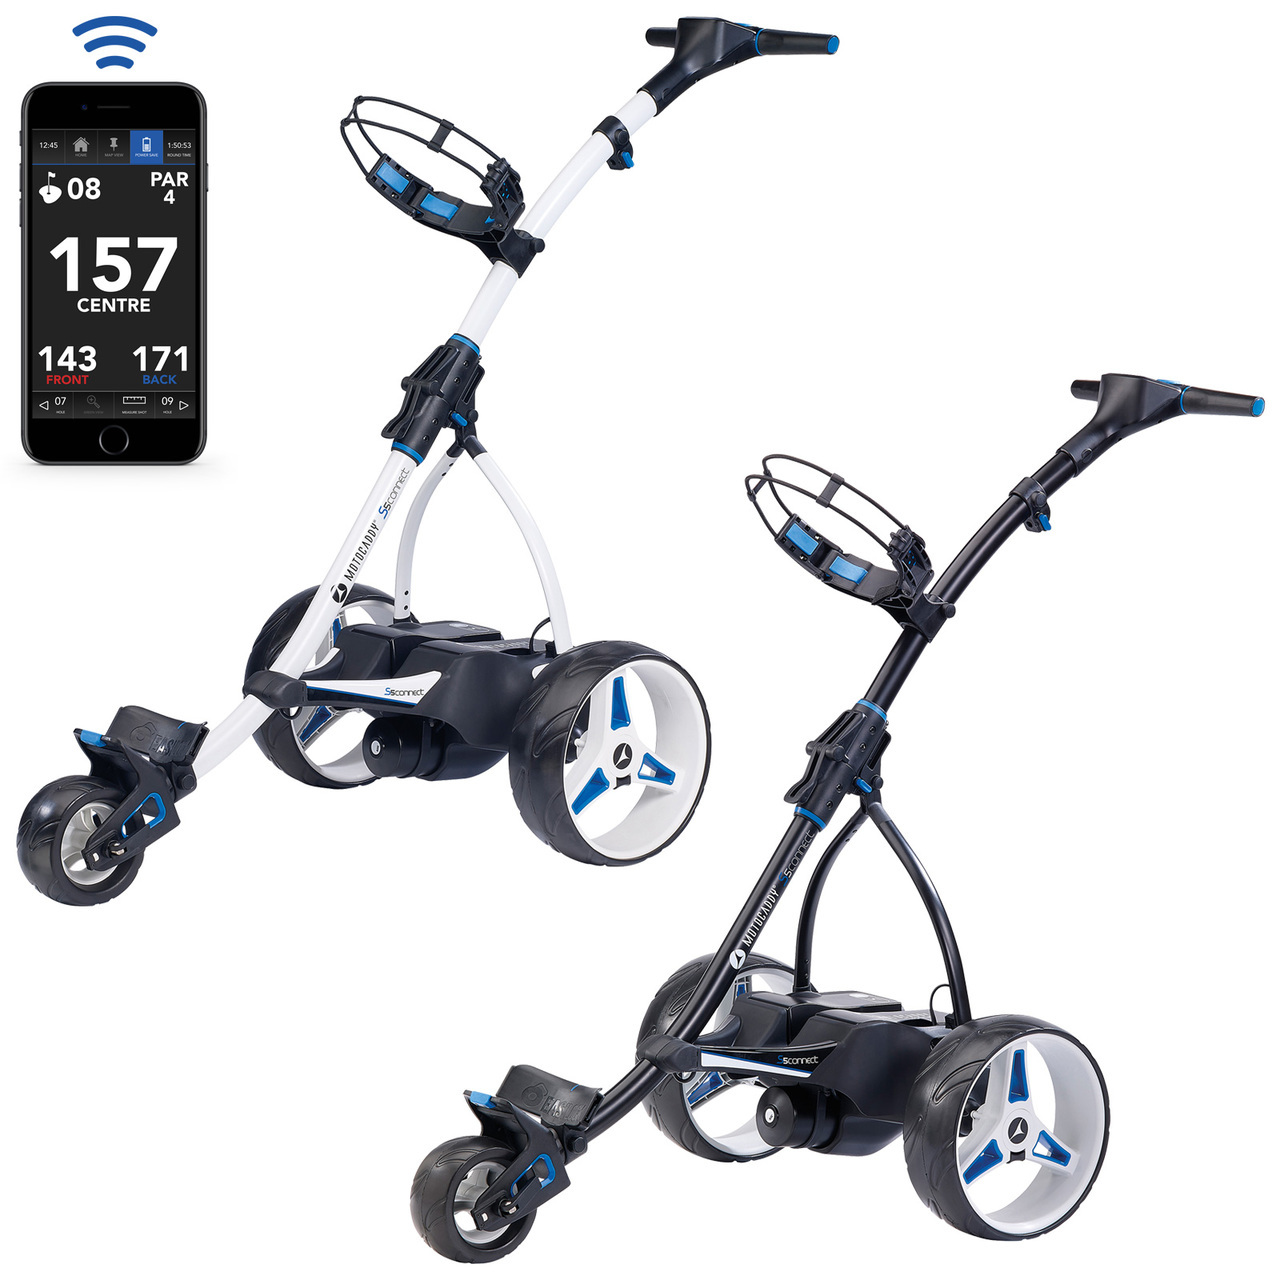 Motocaddy S5 Connect